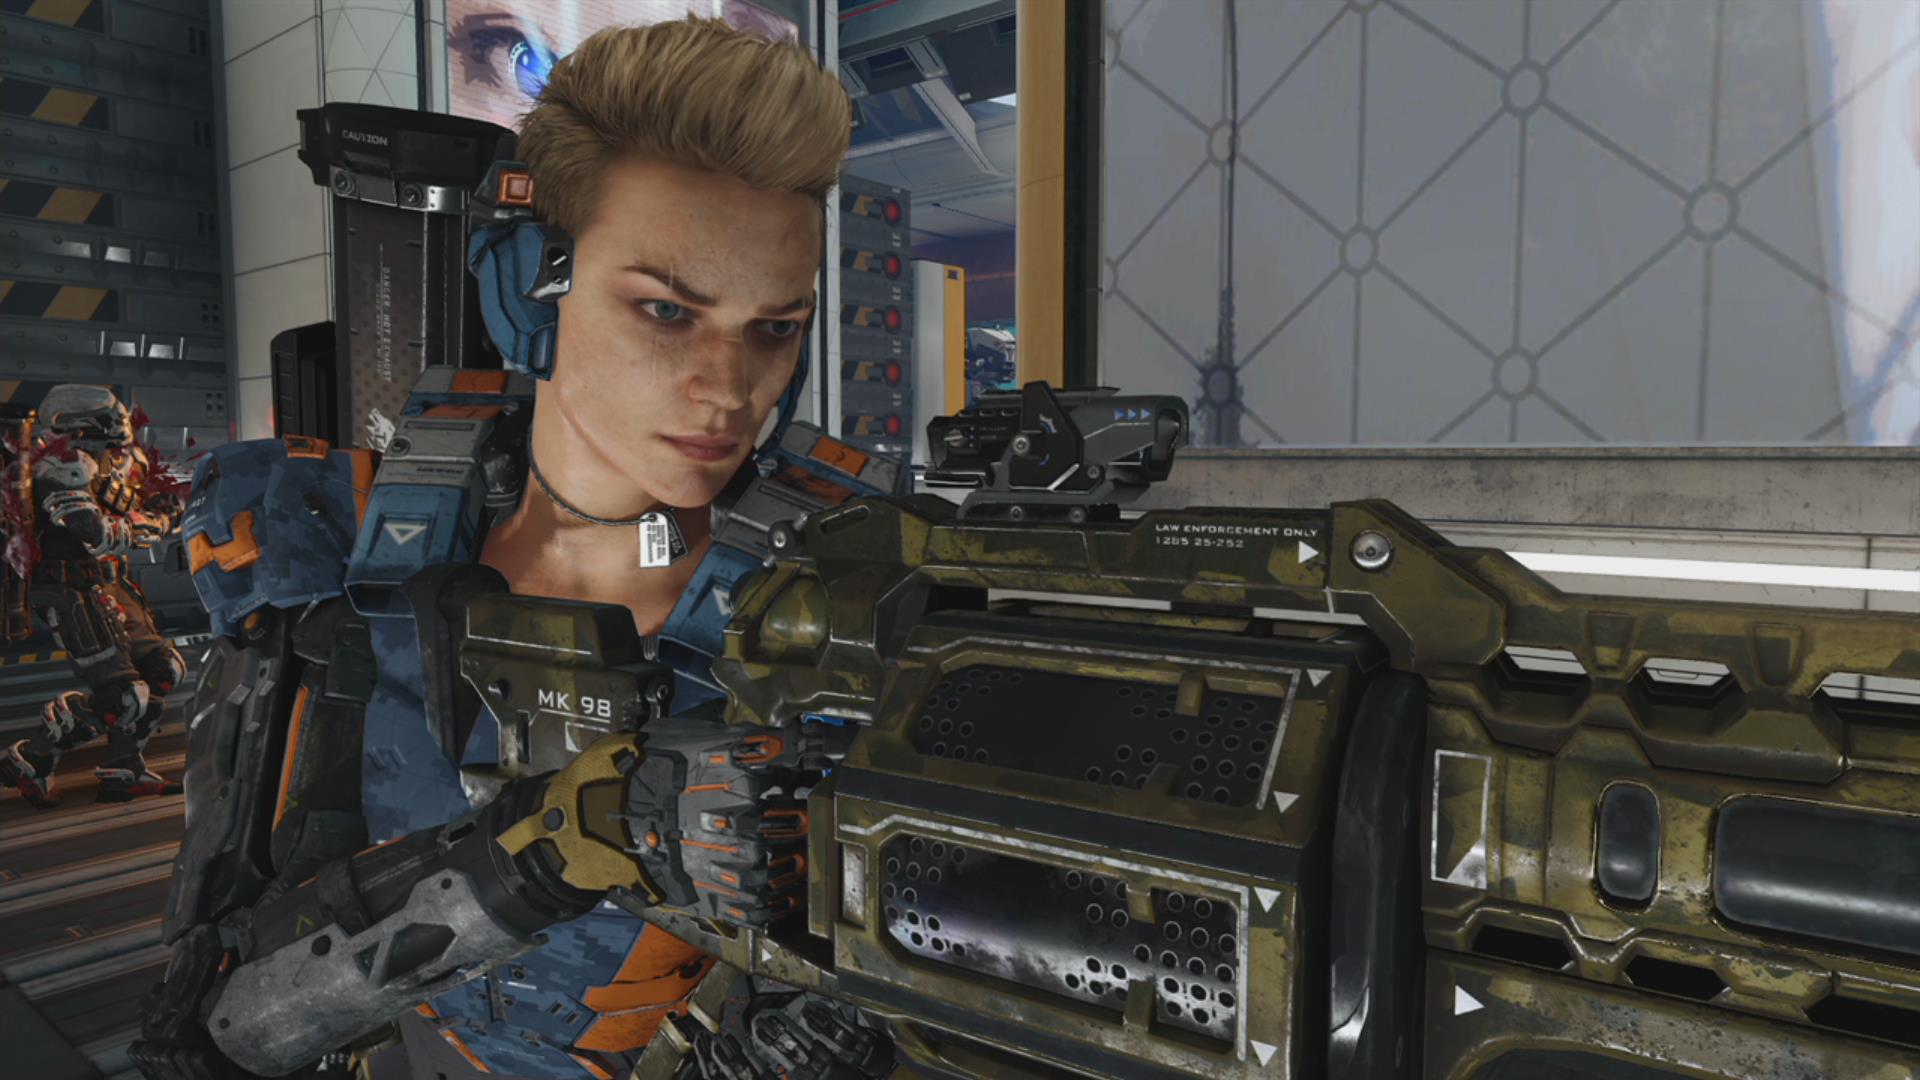 My Favourite Black Ops III Feature So Far Is Theatre Mode